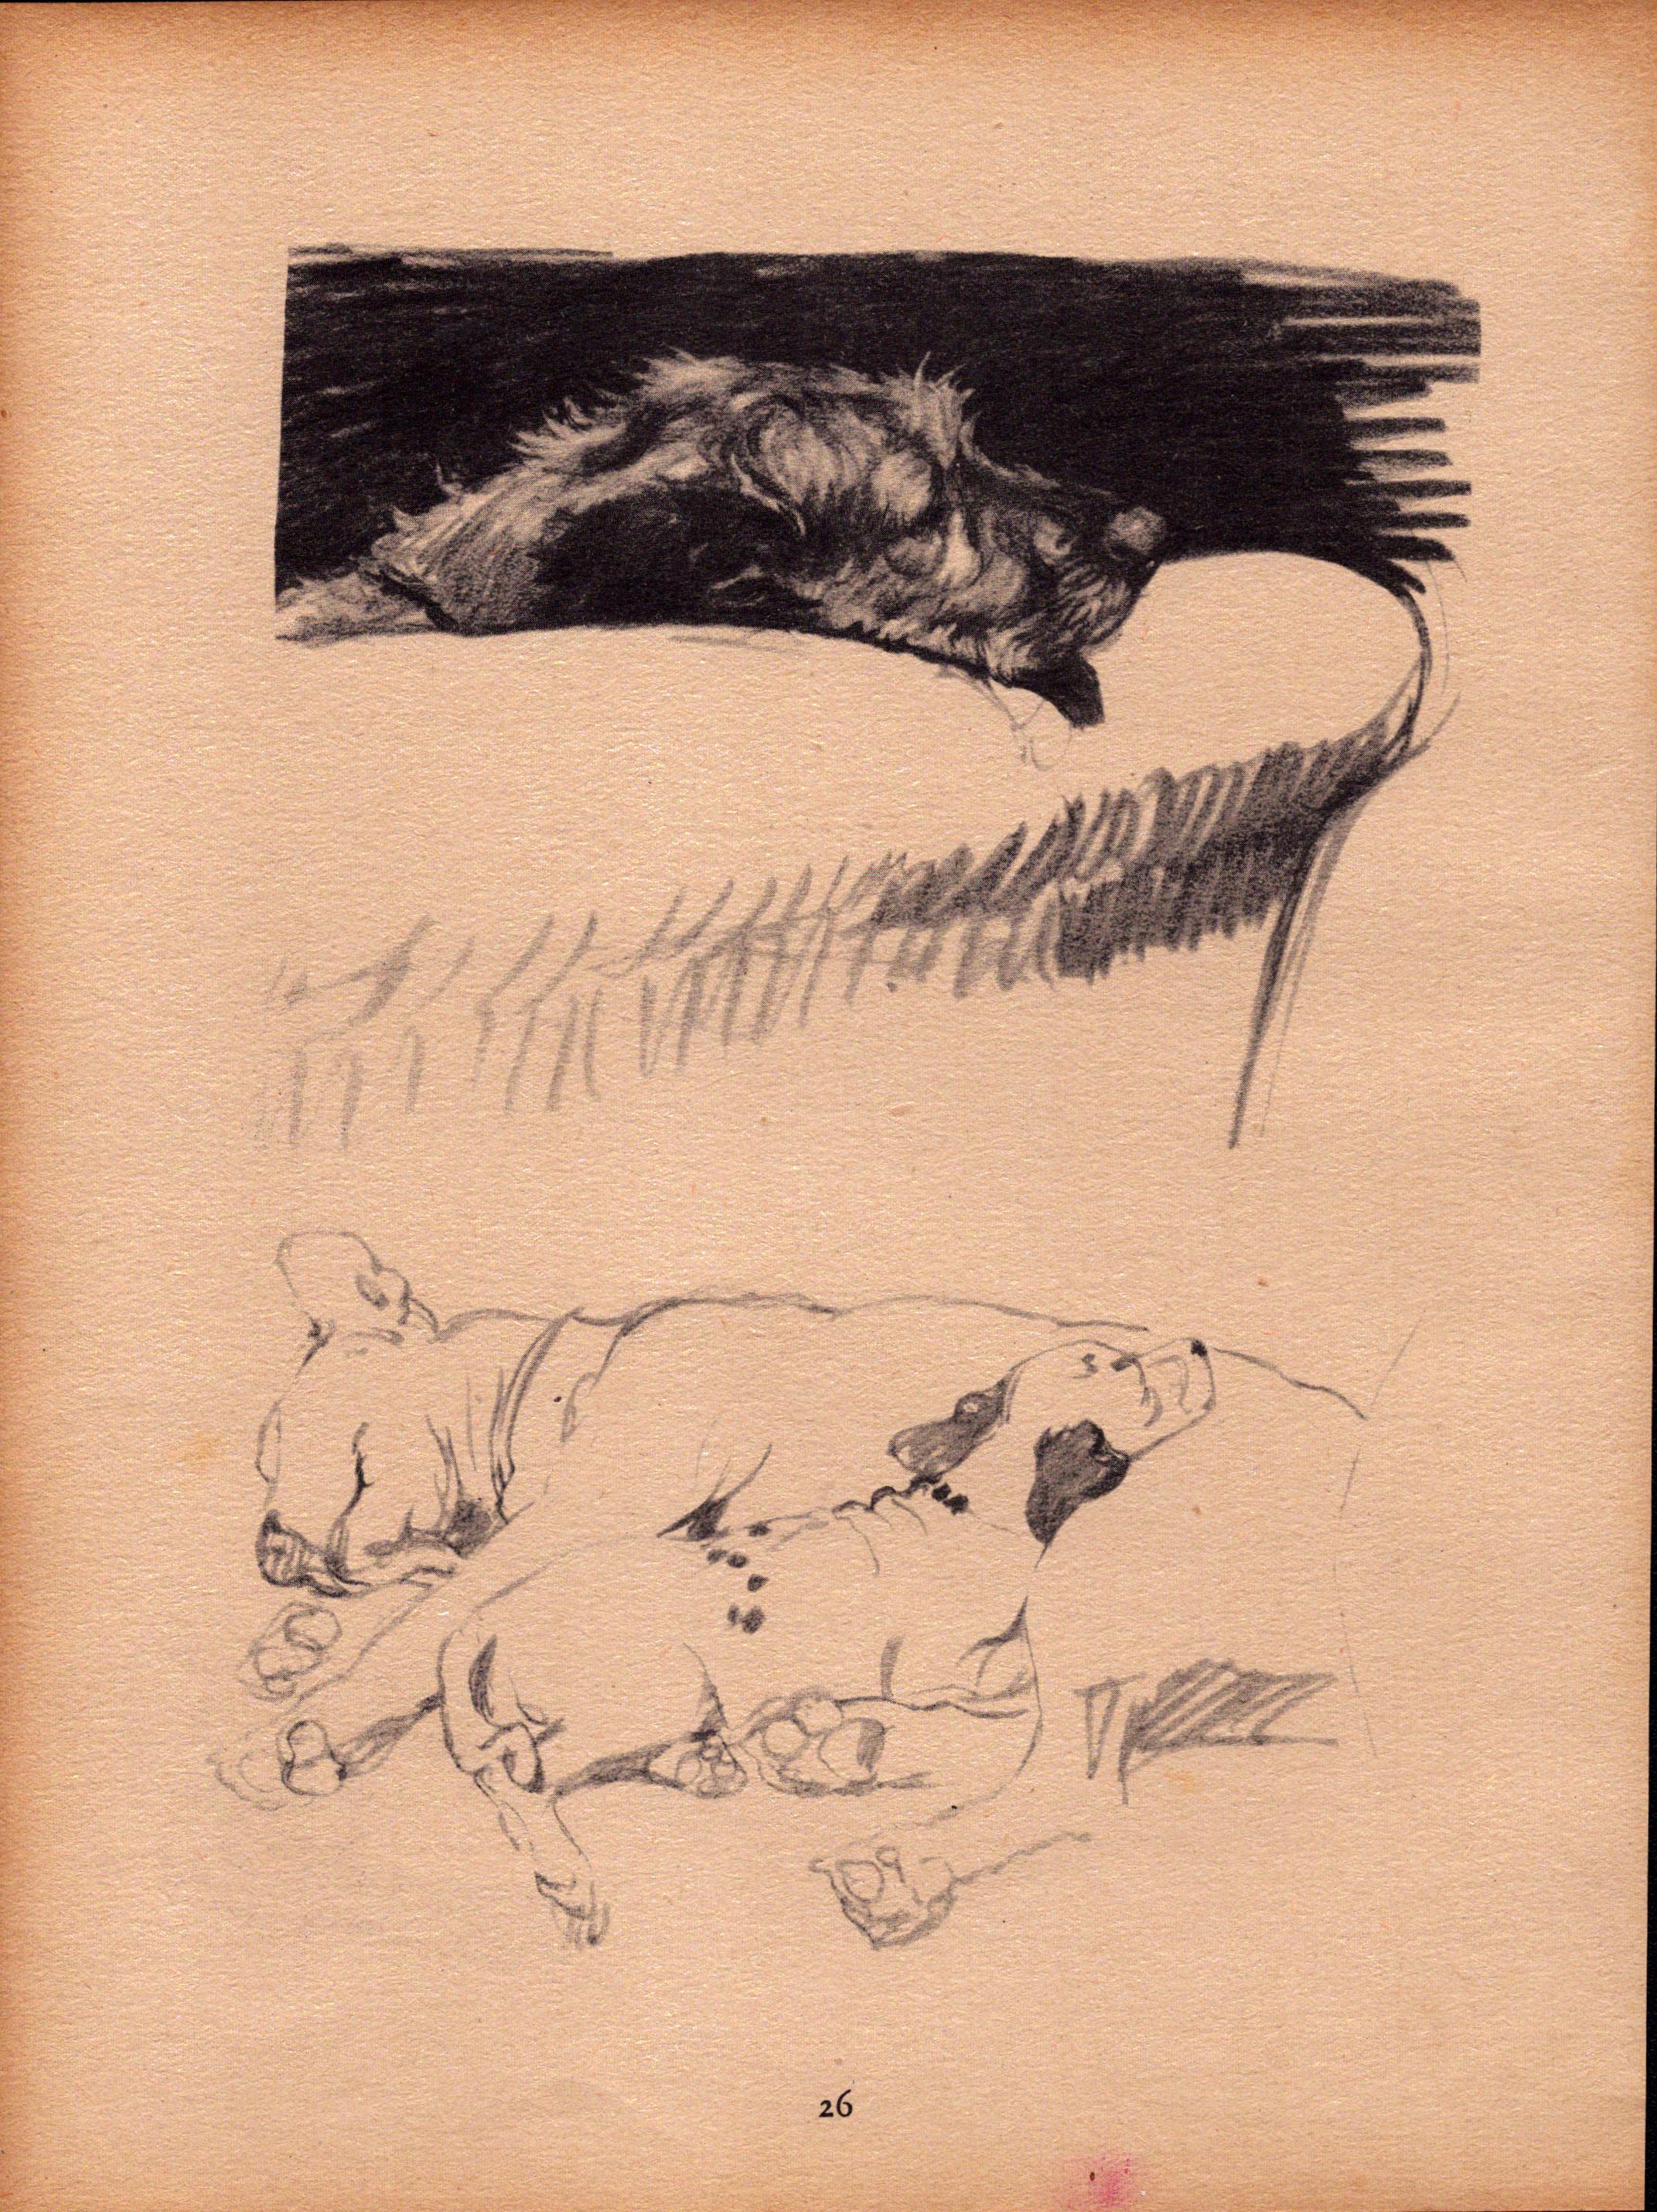 Cecil Aldin Original Vintage 88 Years Old Illustration How to Draw Dogs-6.